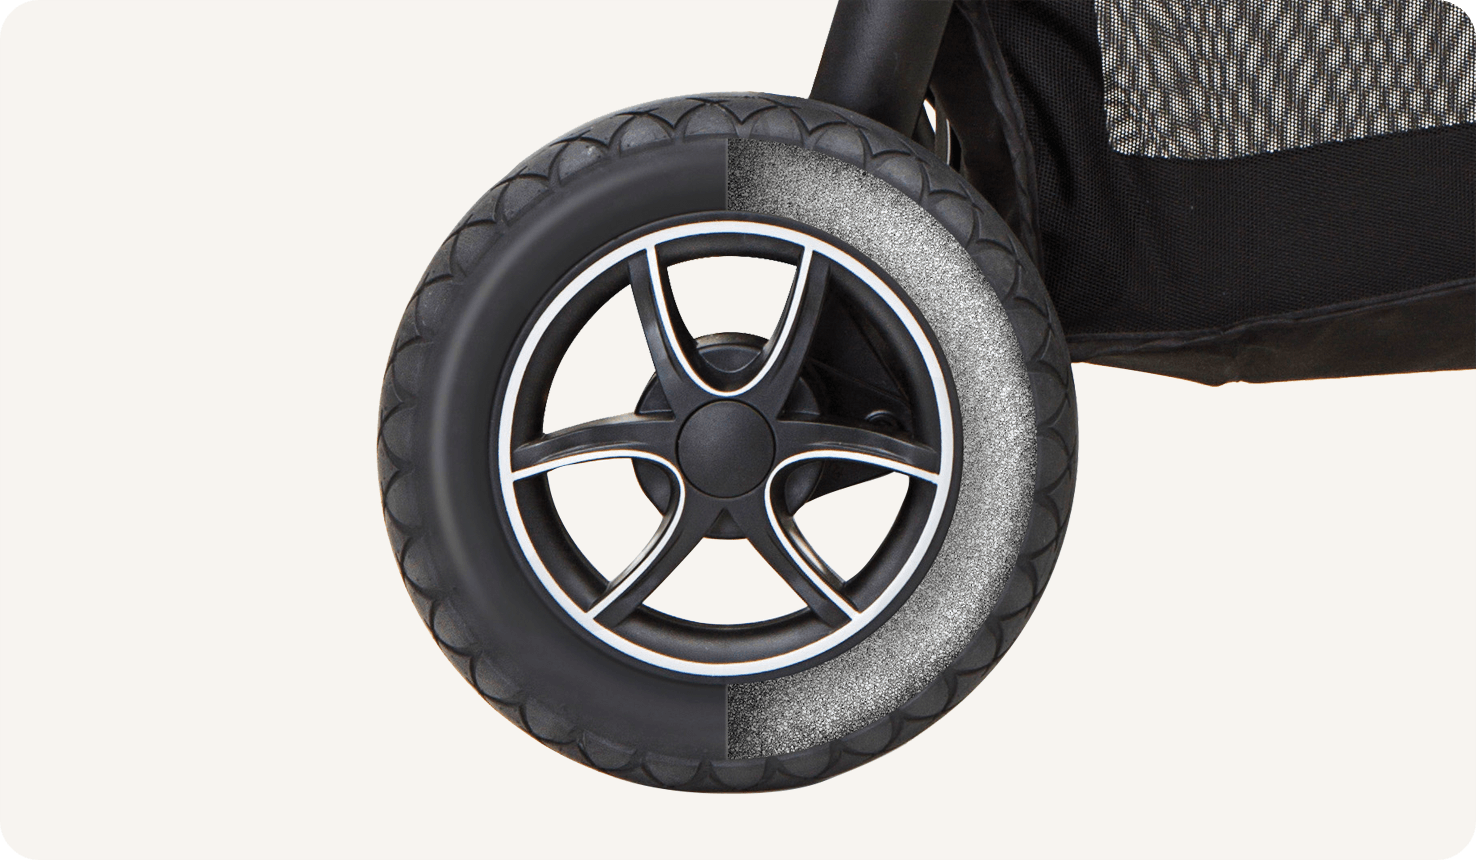 Zoomed in view of the wheel of the gray and black Joie versatrax pram. 